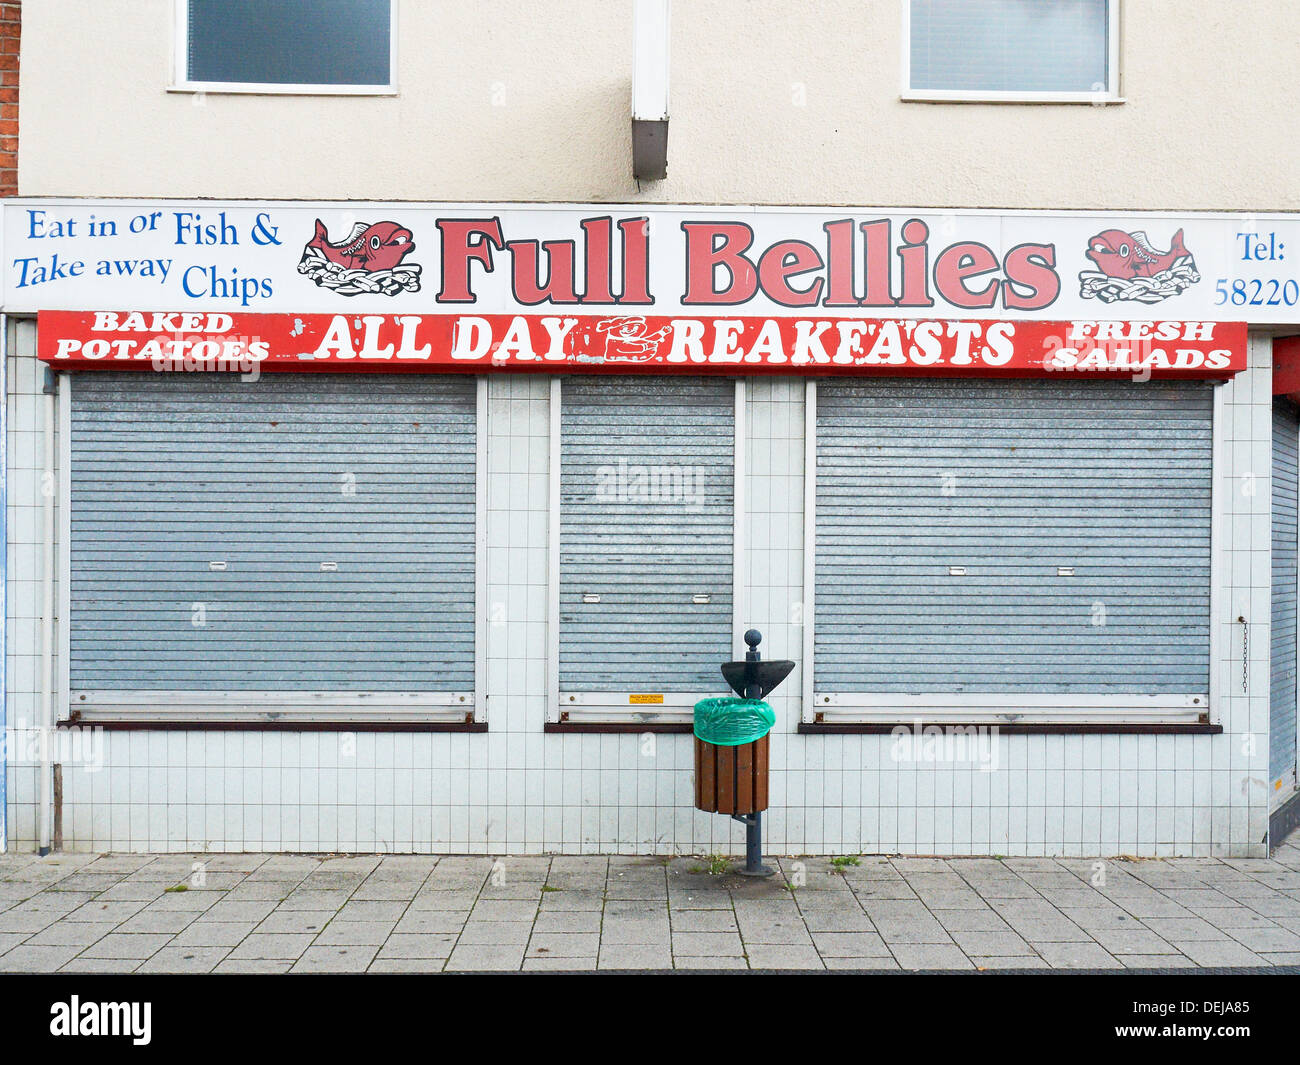 Closed Fish & Chips shop called 'Full Bellies' in Crewe Cheshire UK Stock Photo